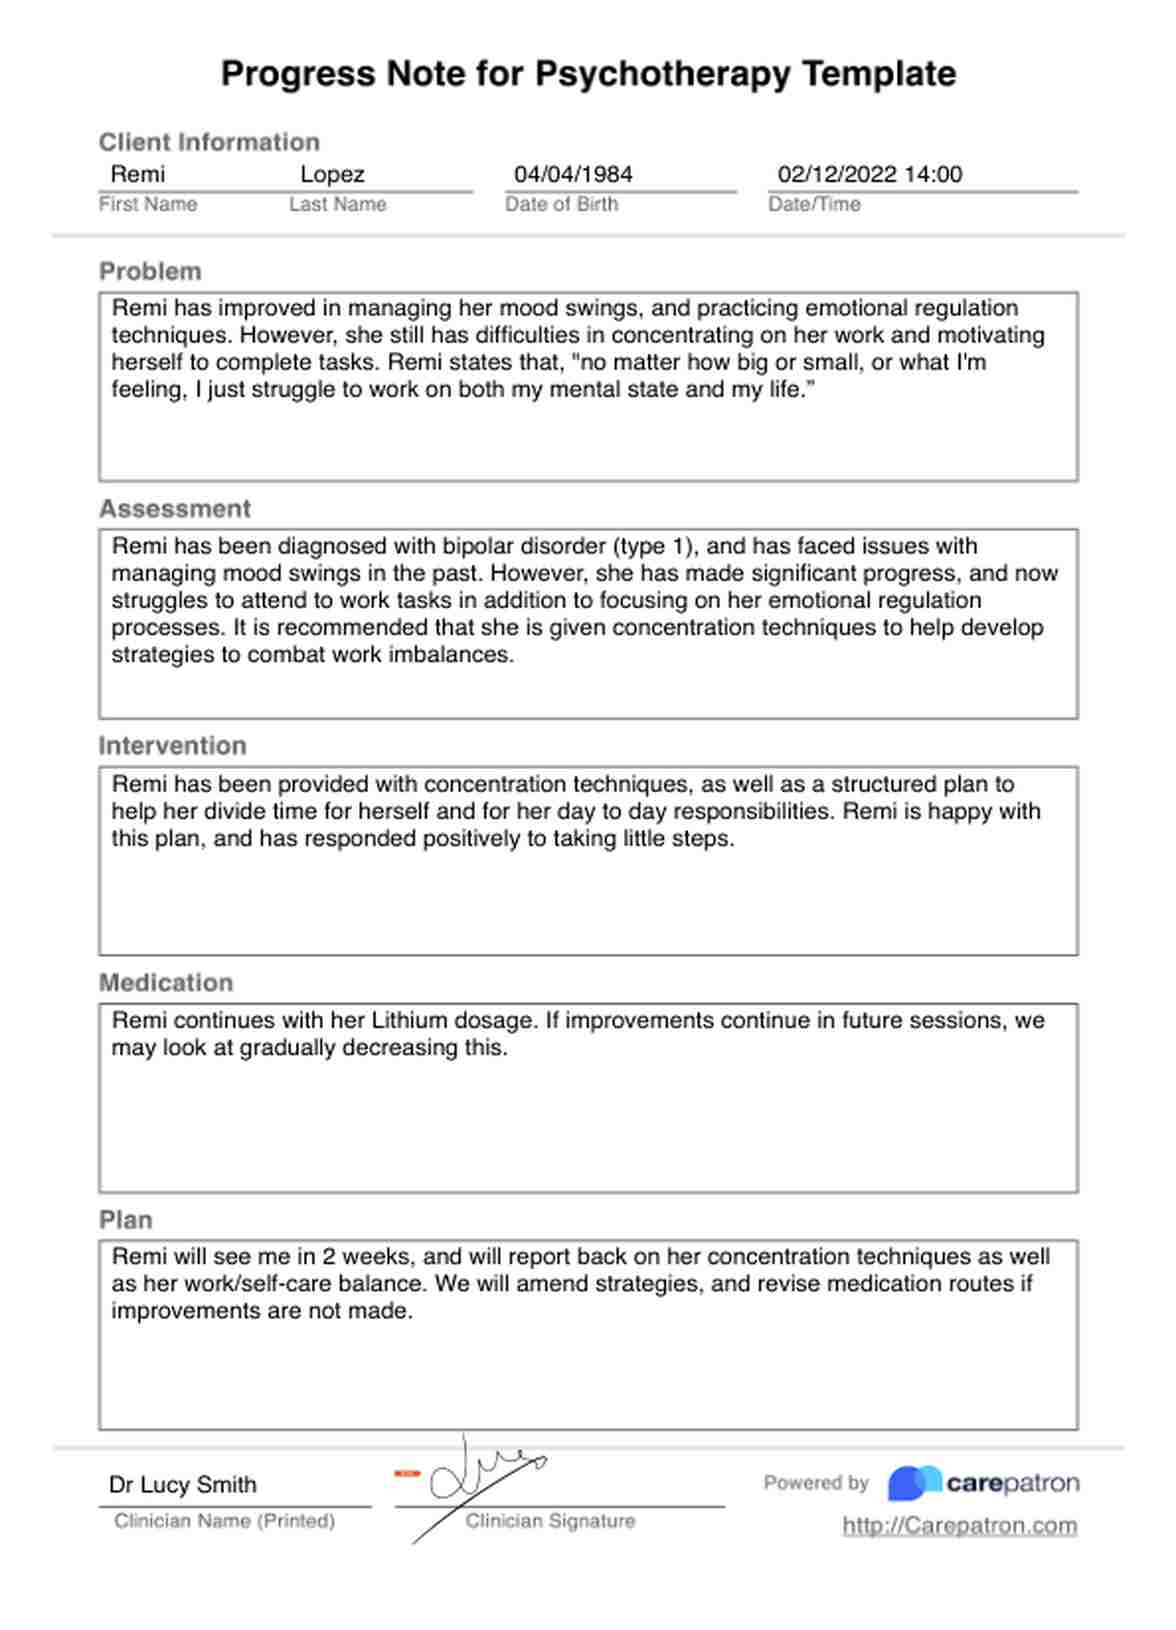 Progress Notes For Psychotherapy Template PDF Example